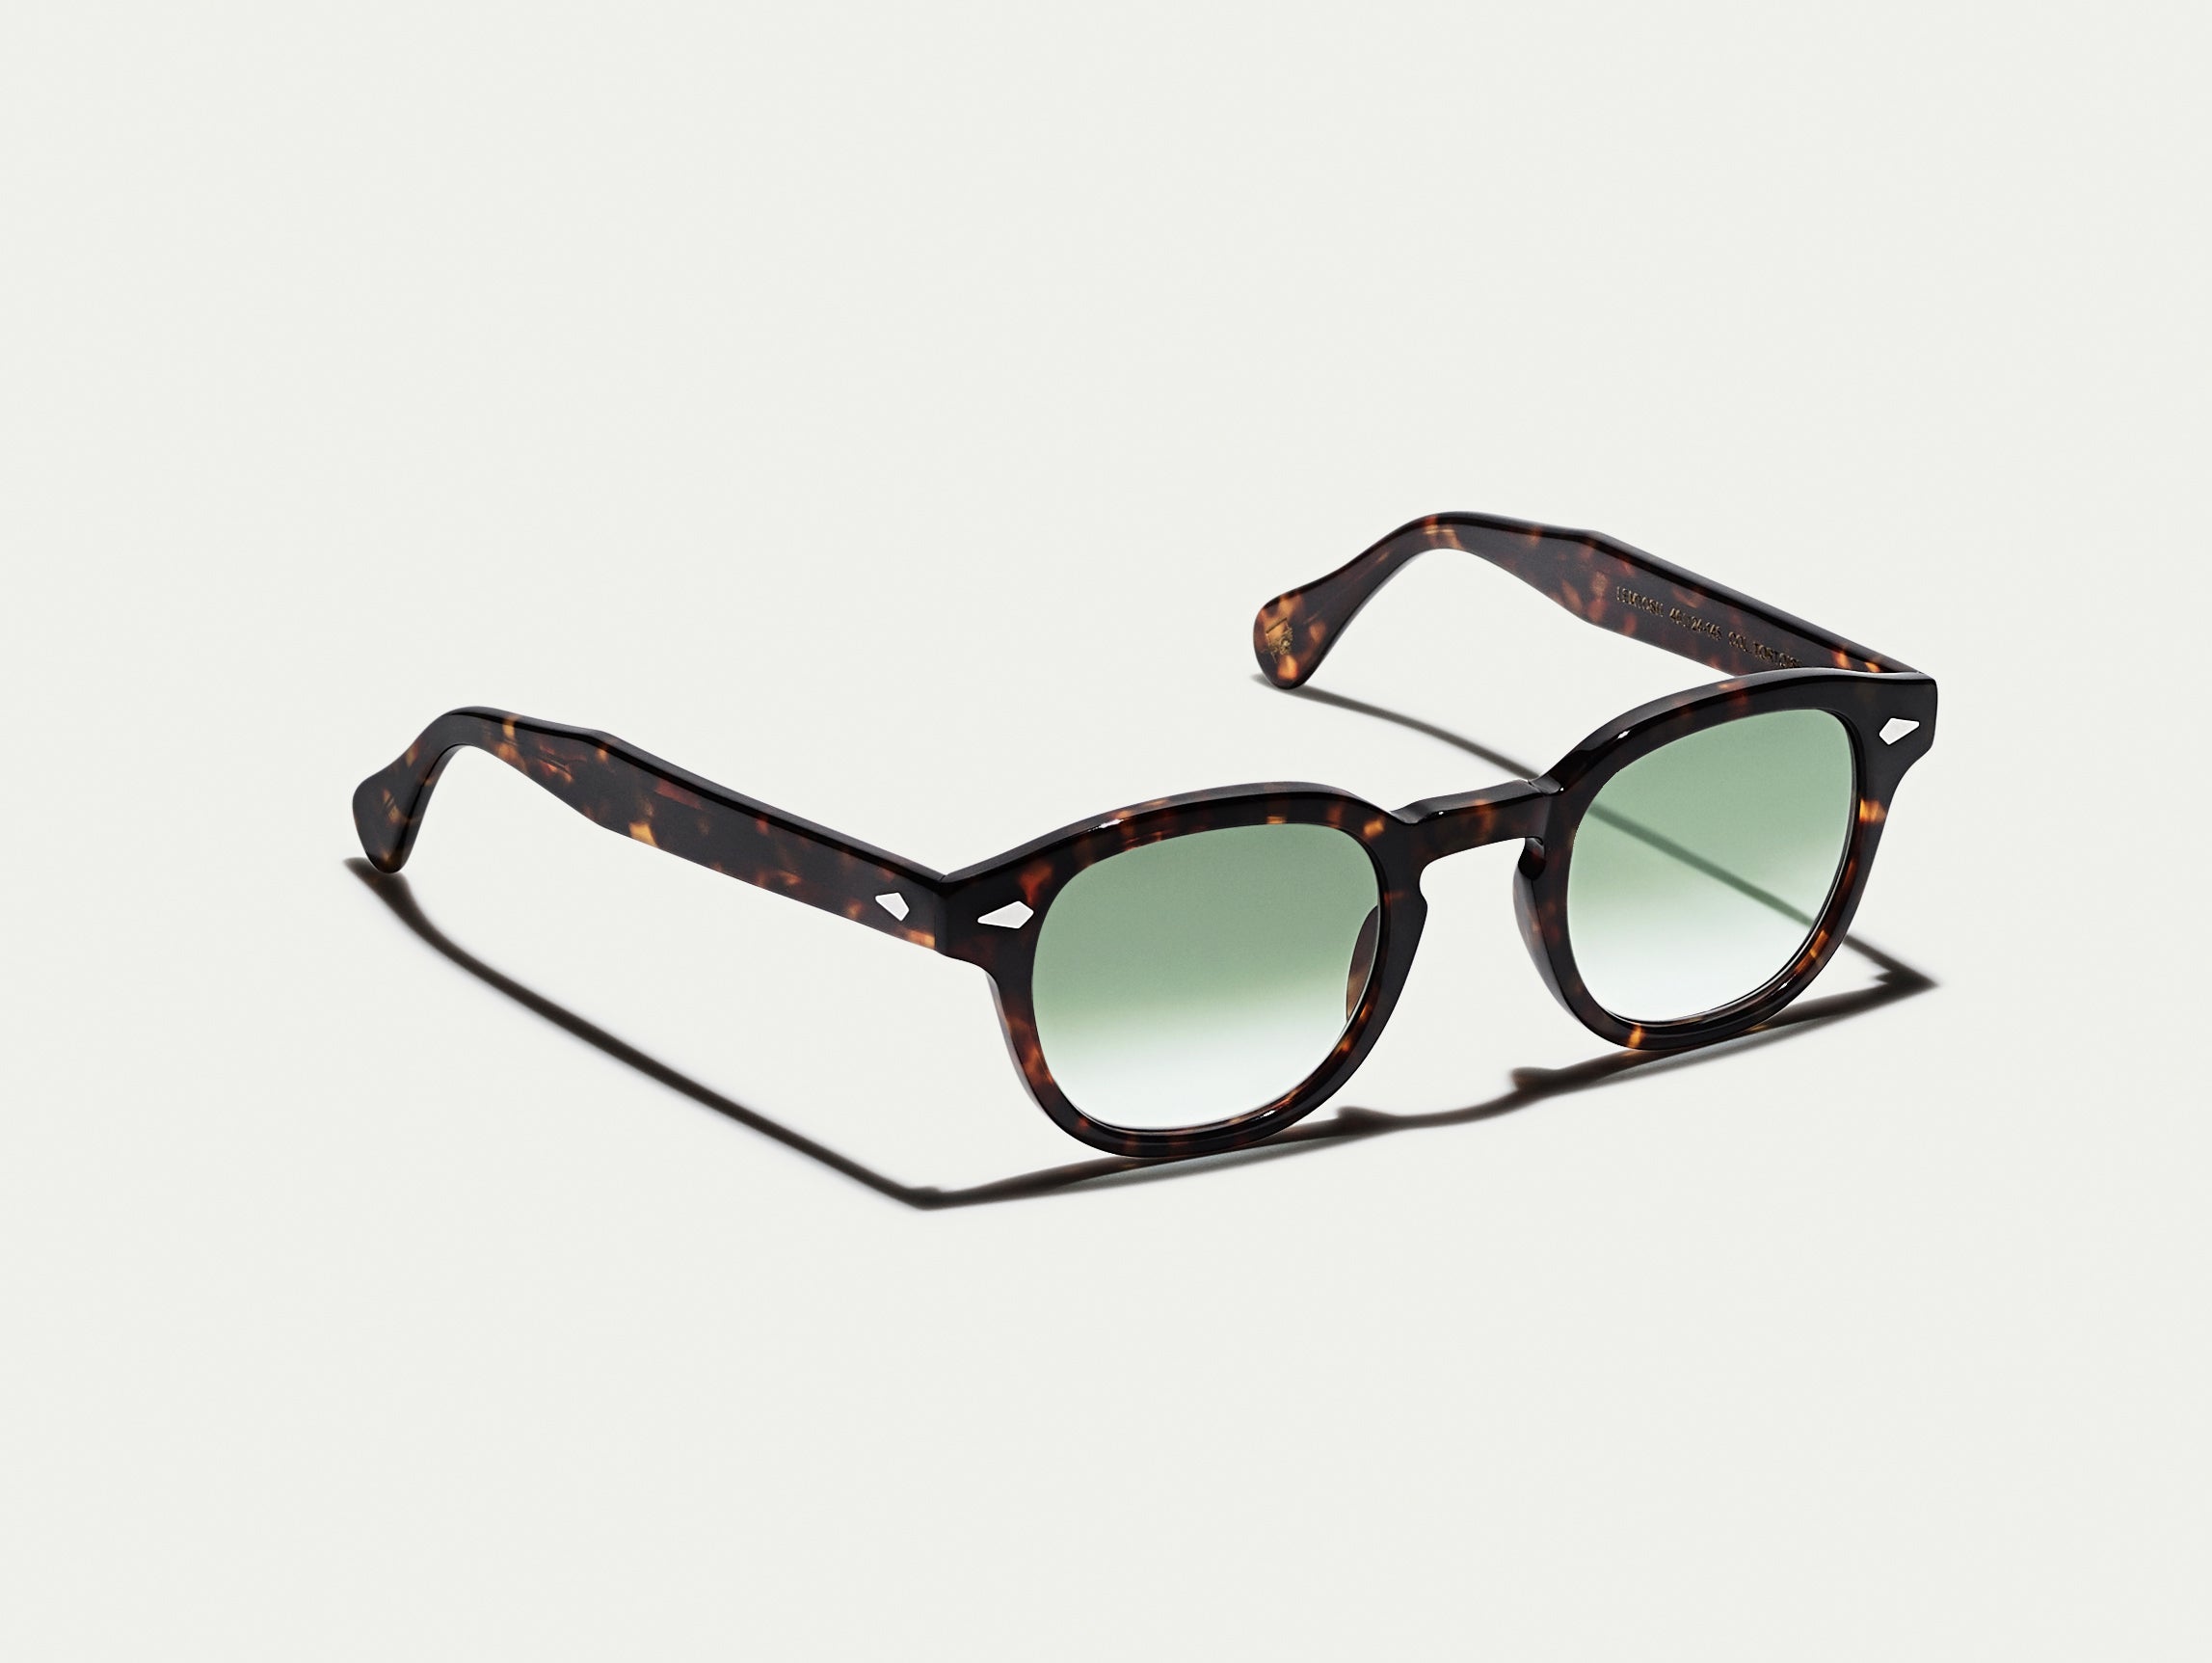 The LEMTOSH Tortoise with G-15 Fade Tinted Lenses